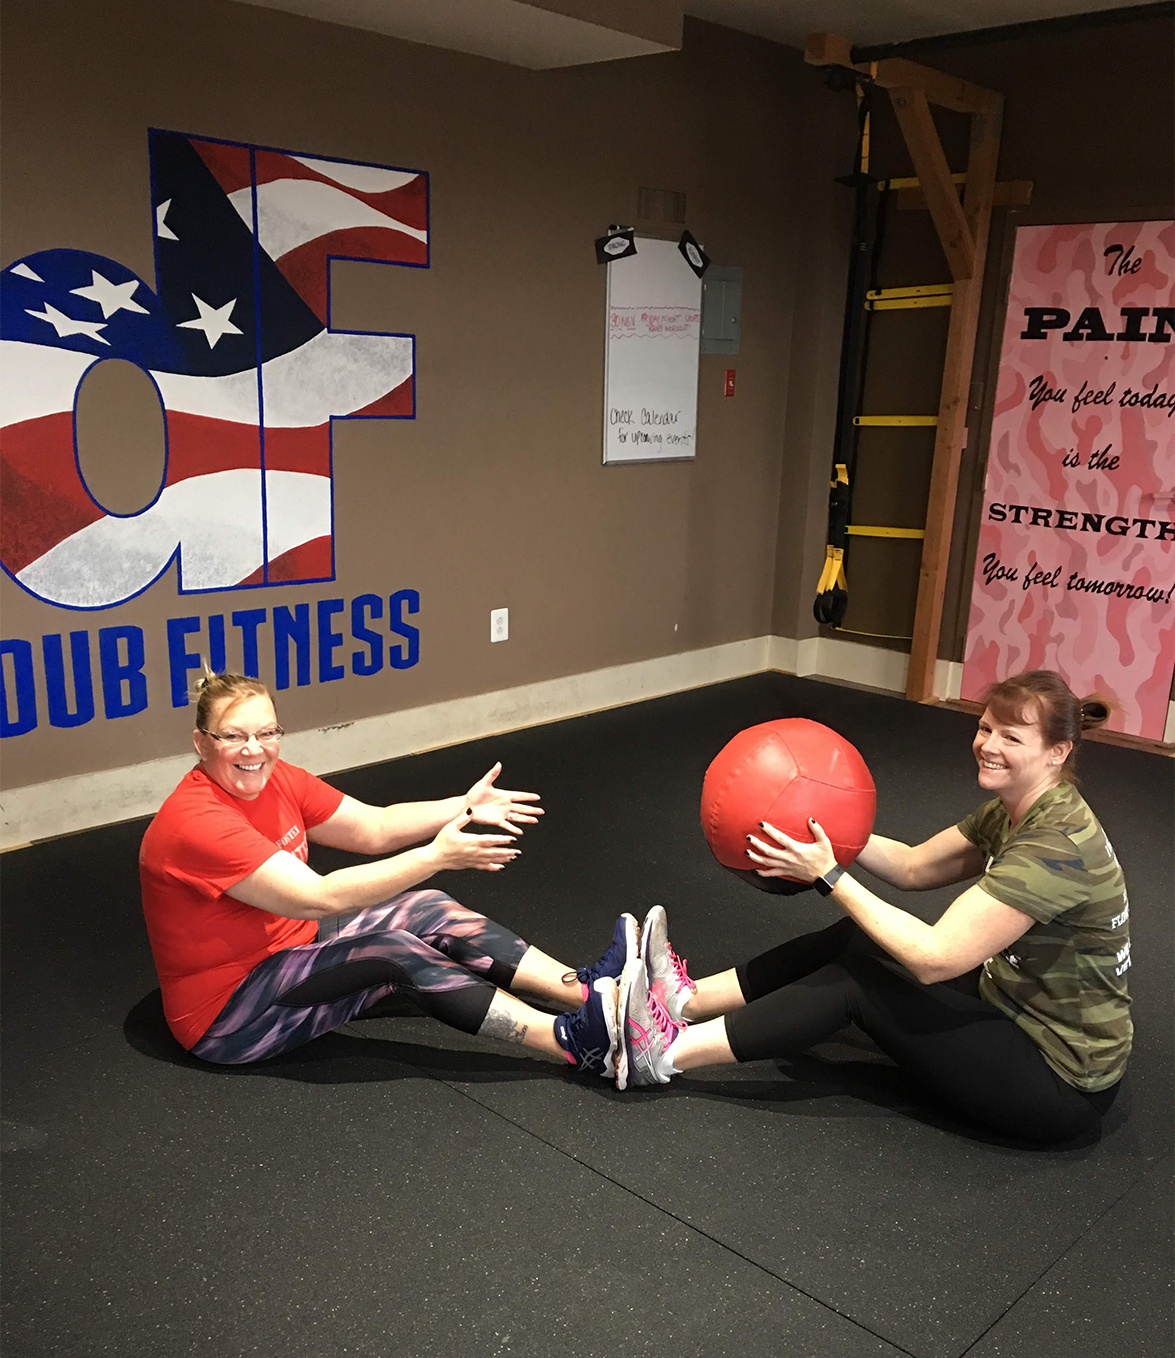 Two people sitting on the ground doing a medicine ball exercise